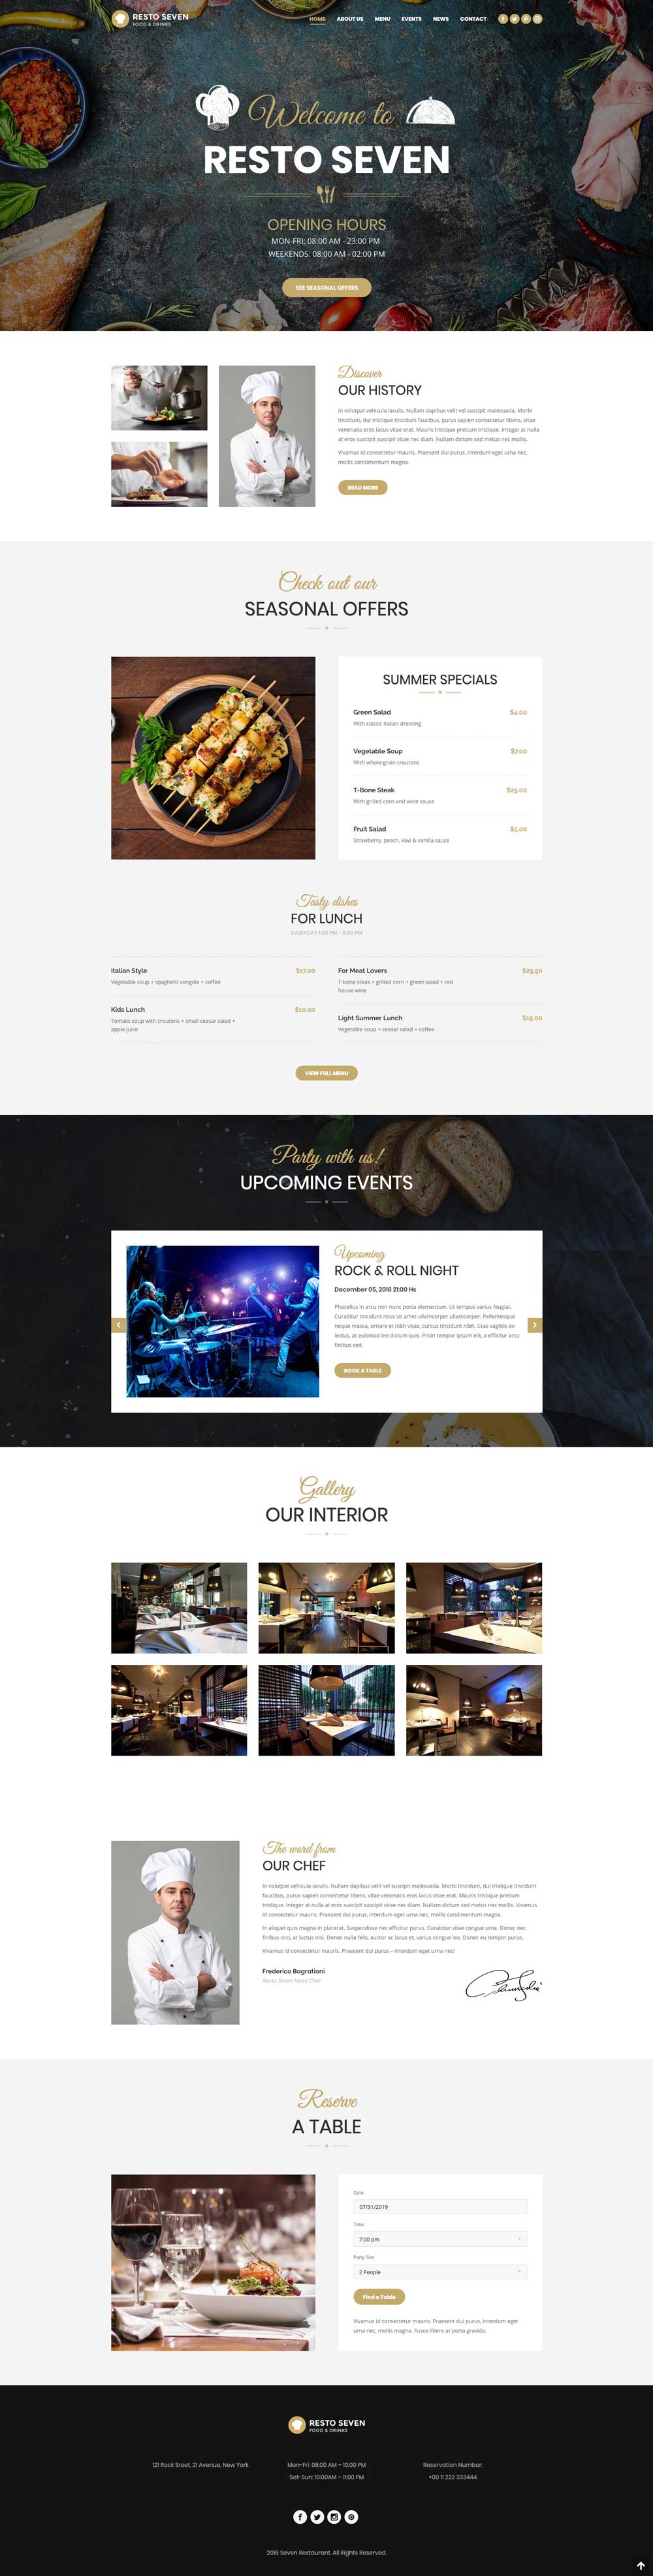 small business affordable web design sample